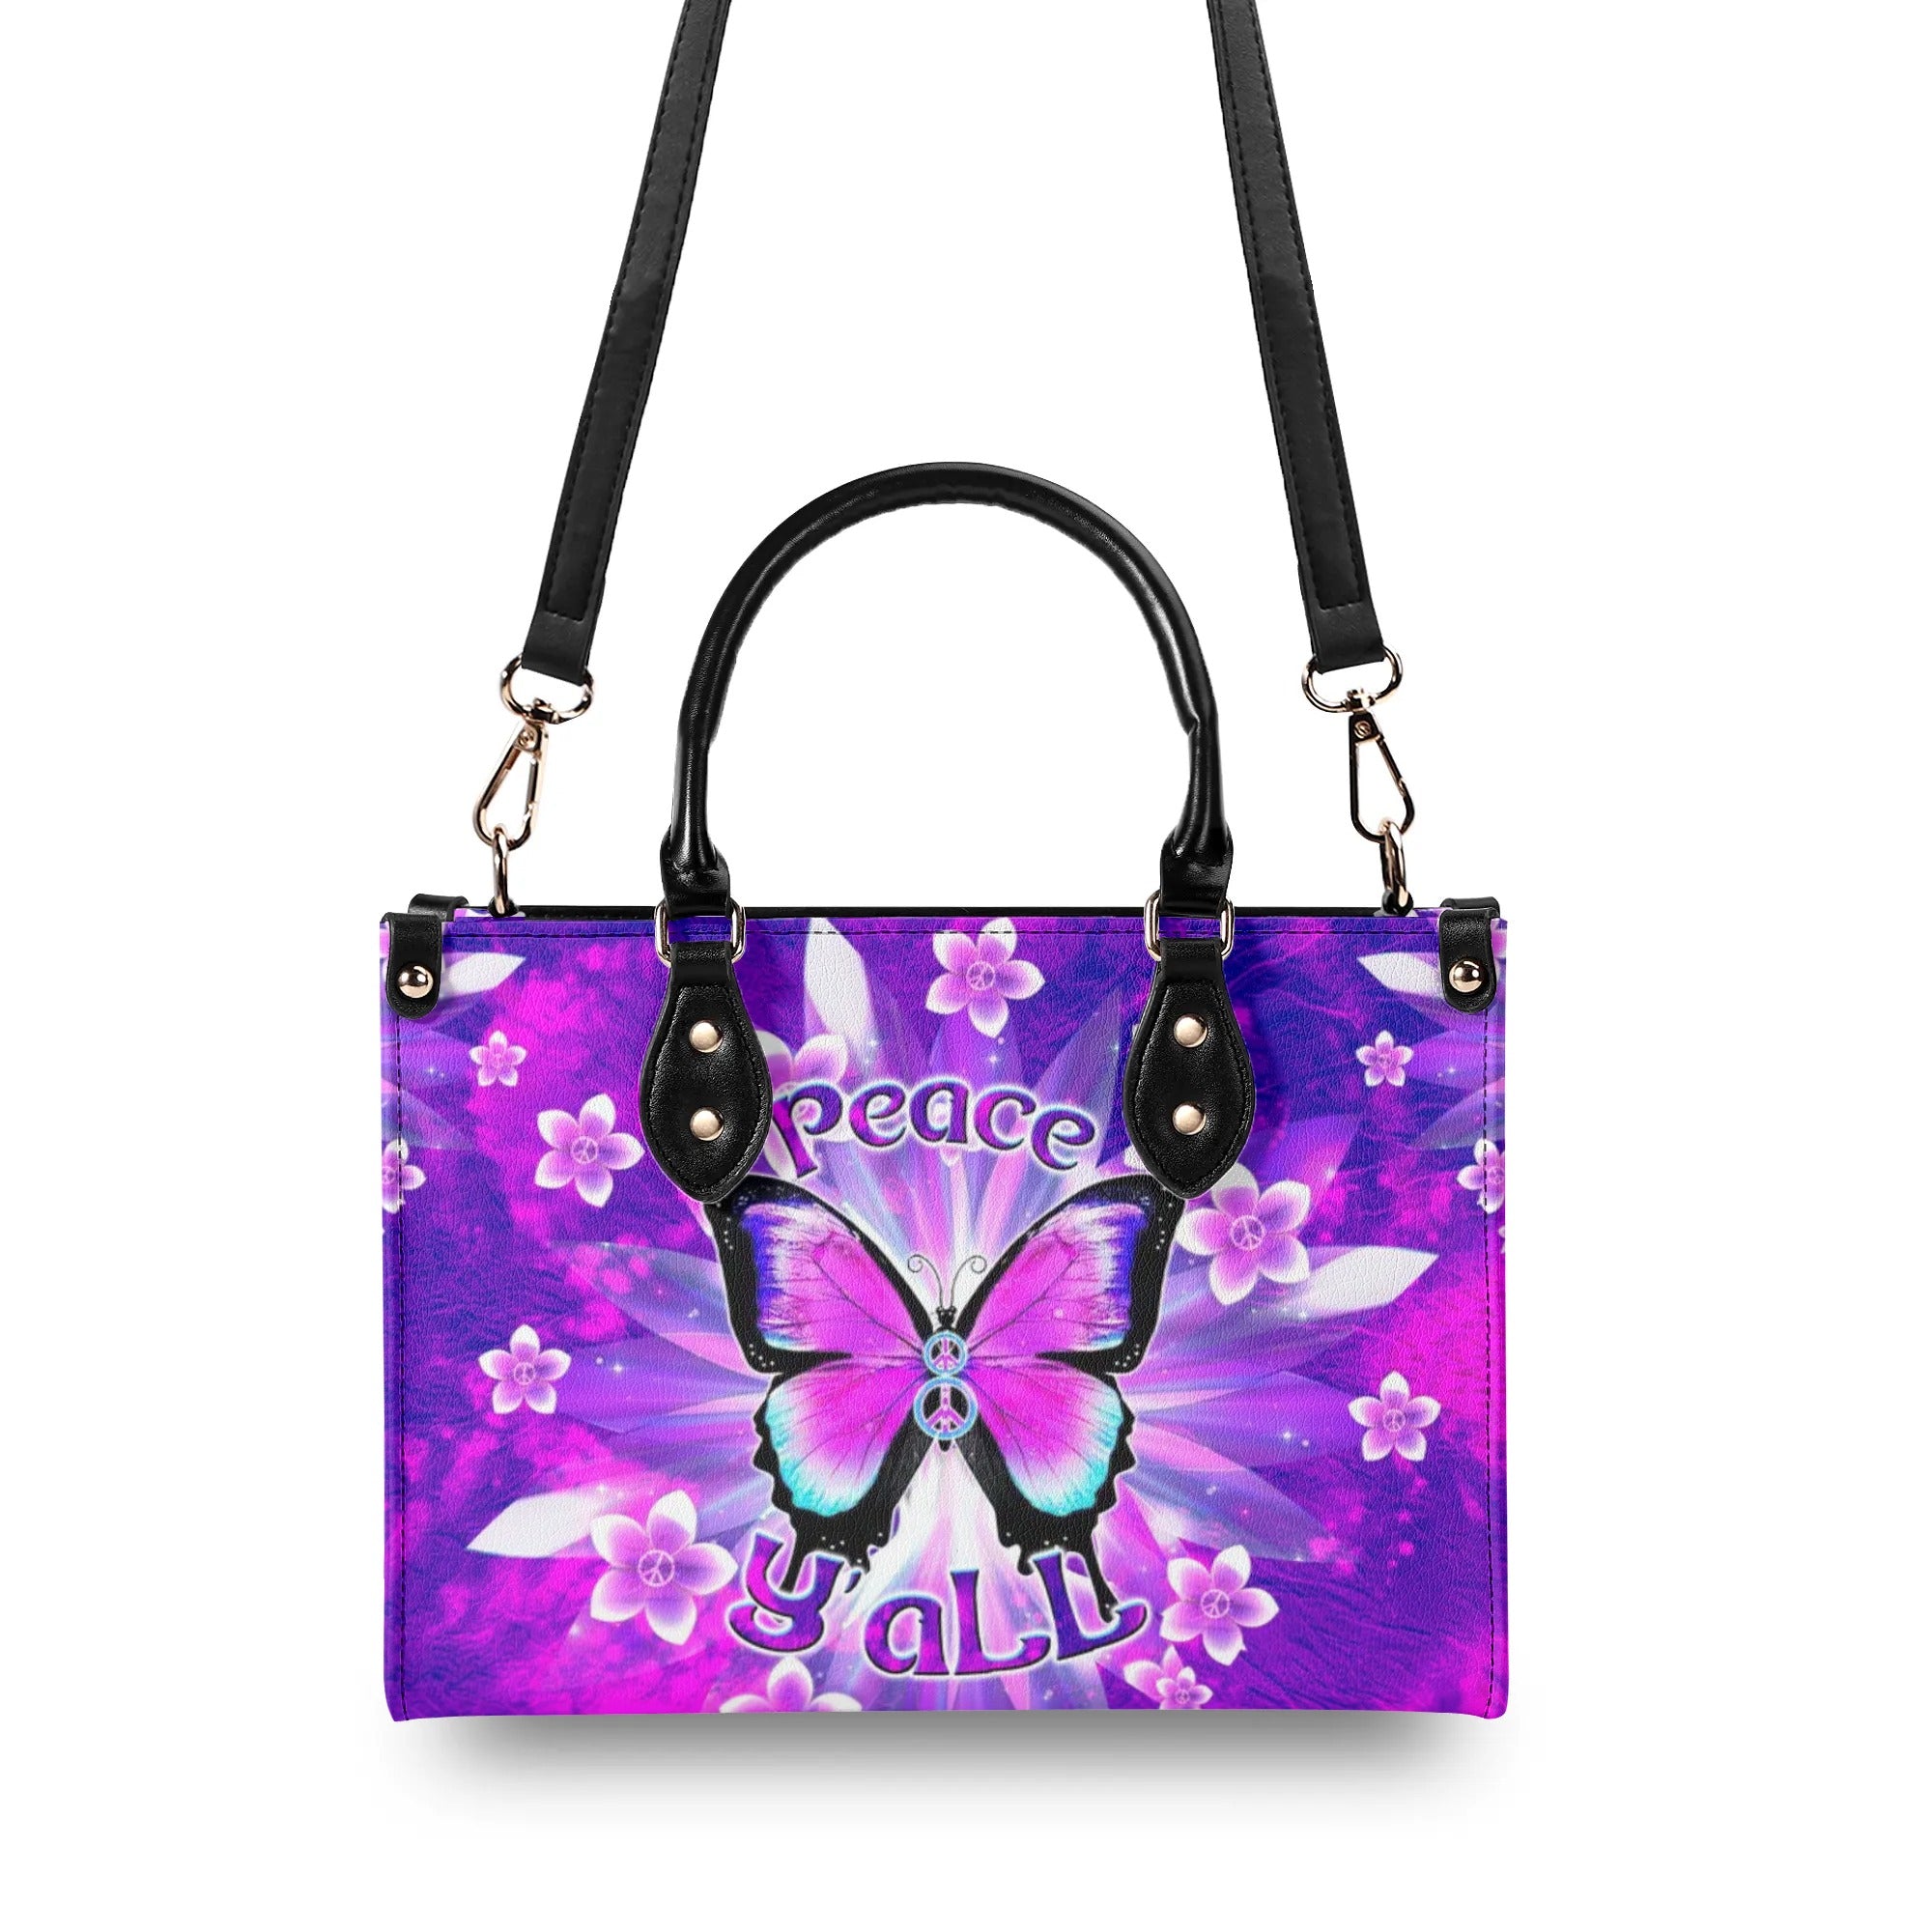 PEACE Y'ALL BUTTERFLY LEATHER HANDBAG - TLTW1906244